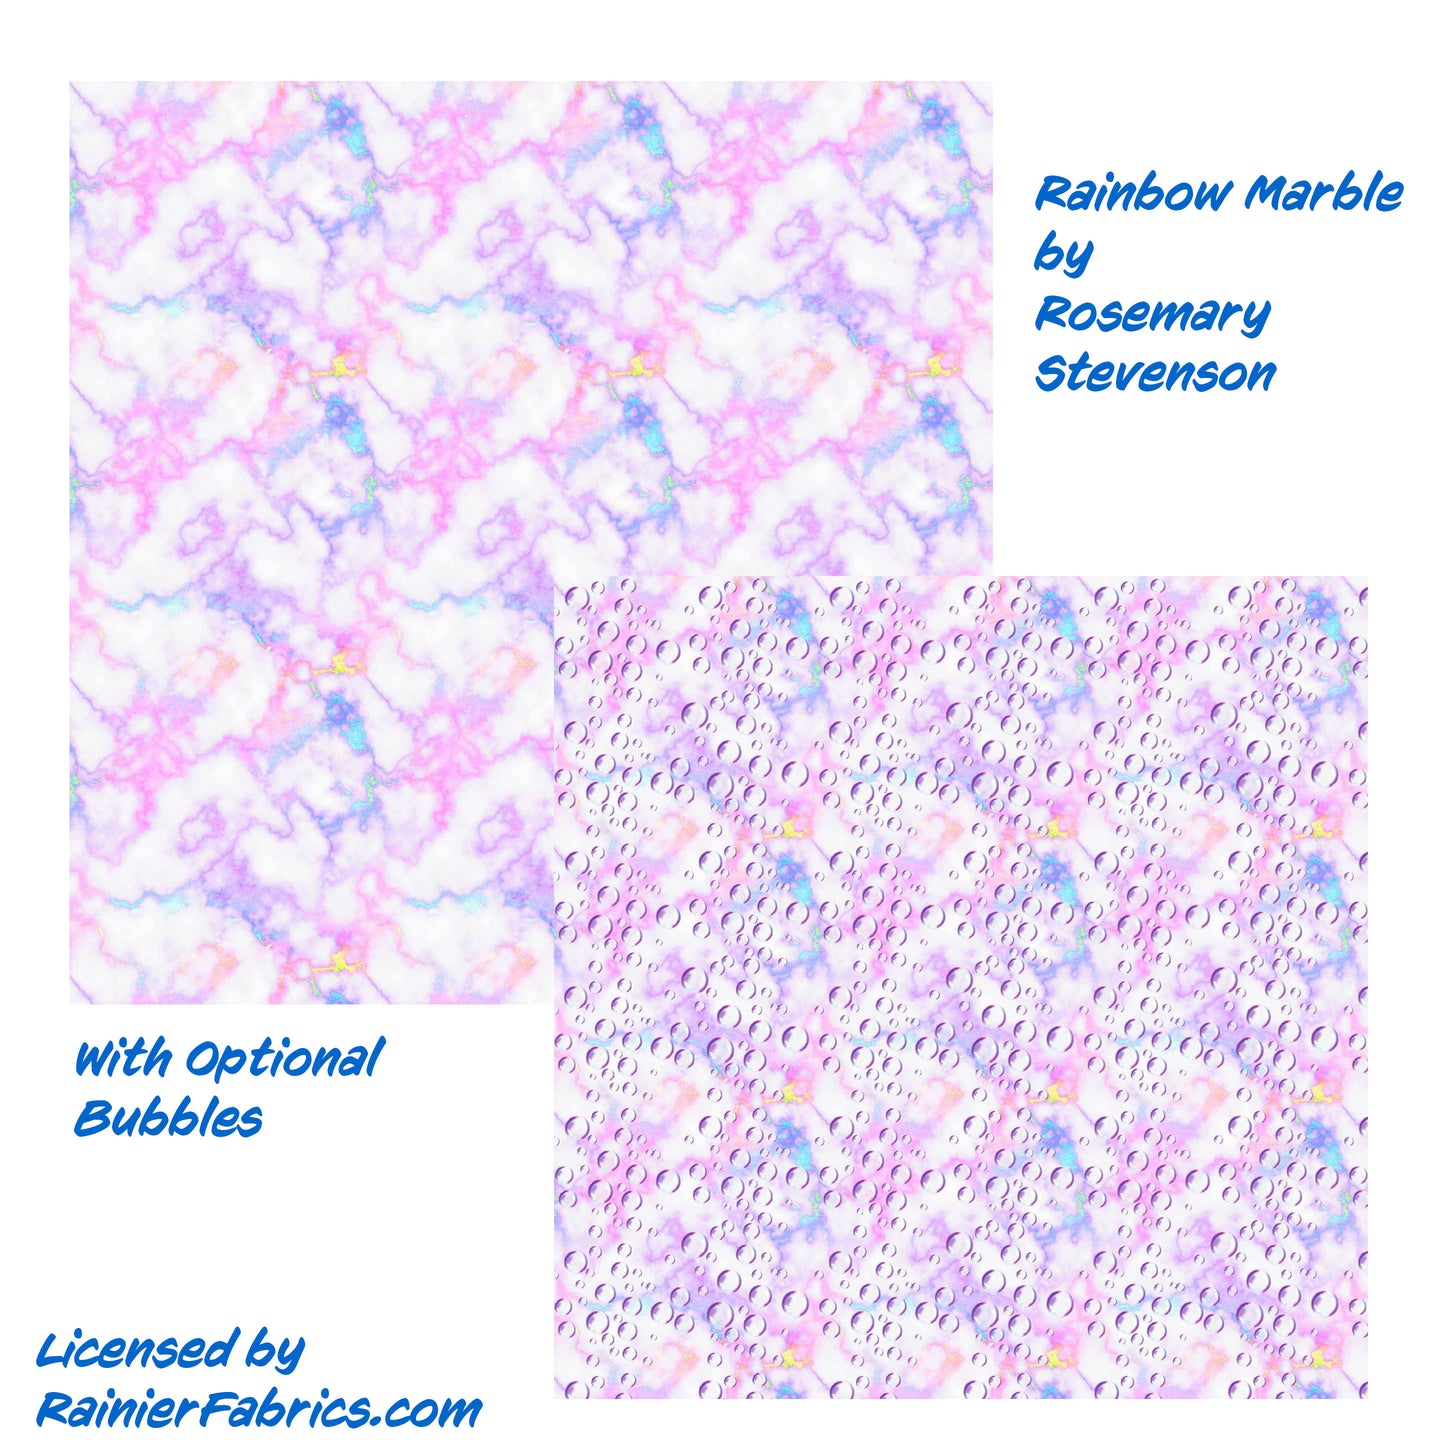 Marble with Optional Bubbles from Rosemary Stevenson  - 2-5 day turnaround - Order by 1/2 yard; Description of bases below